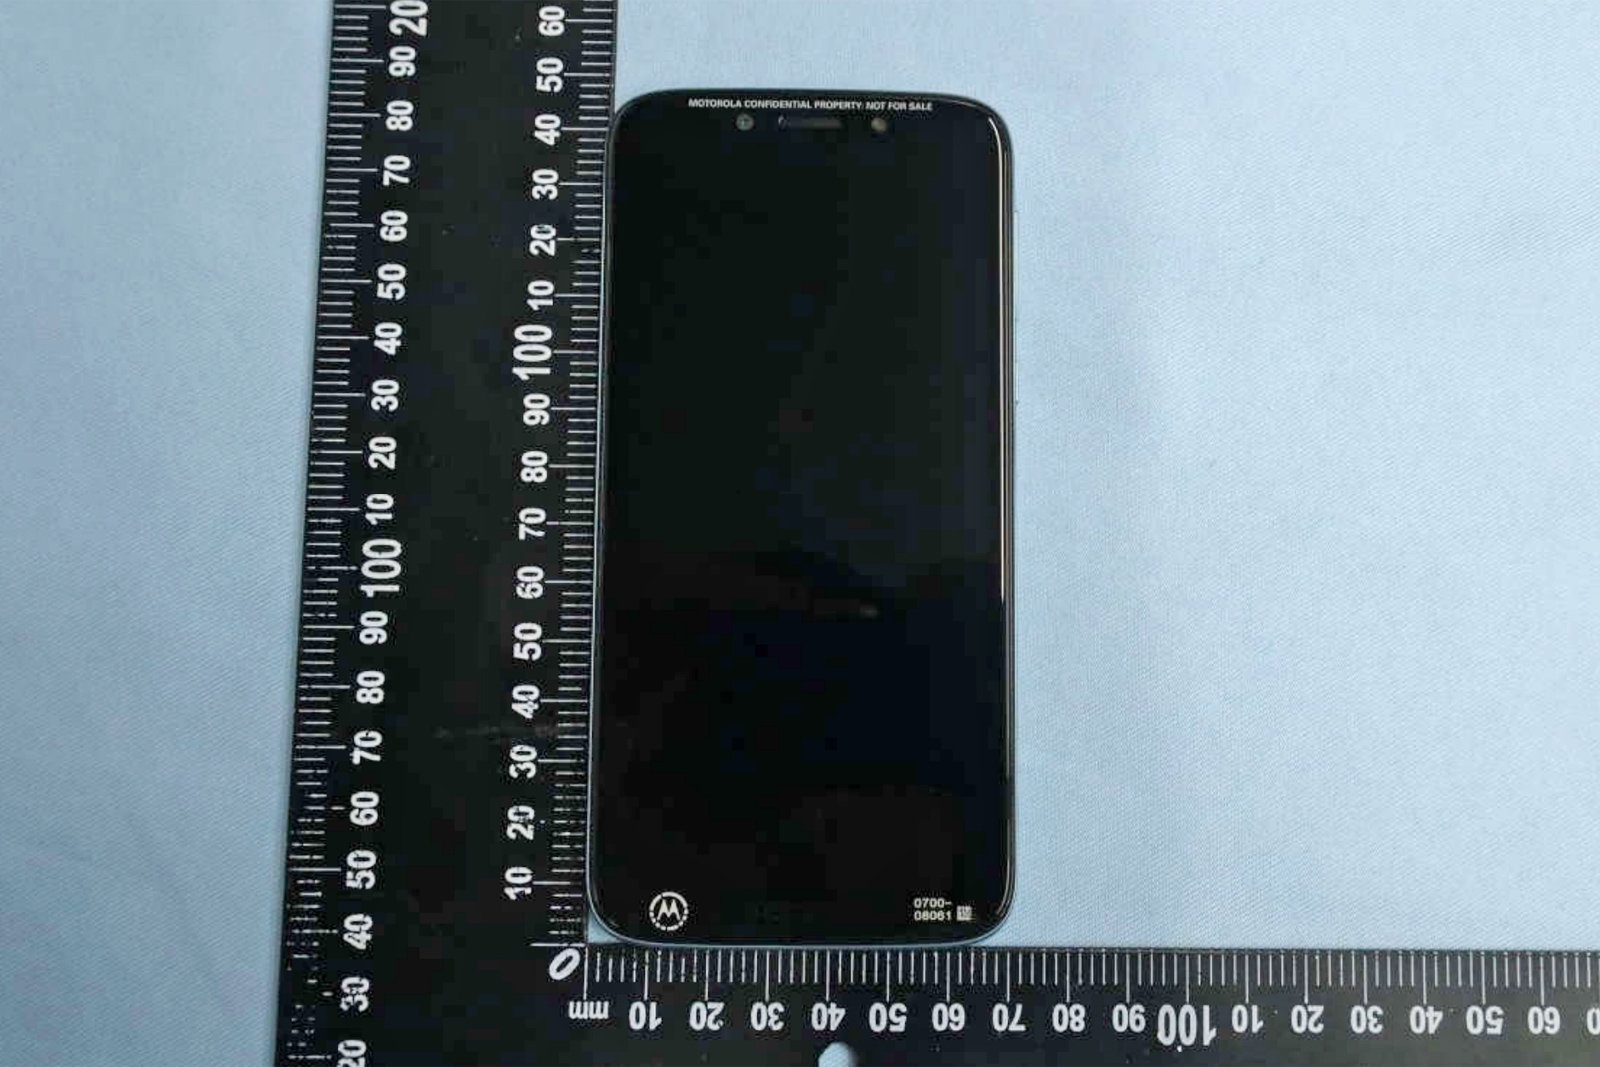 Moto G7 Play surfaces at the FCC with a display notch | DeviceDaily.com